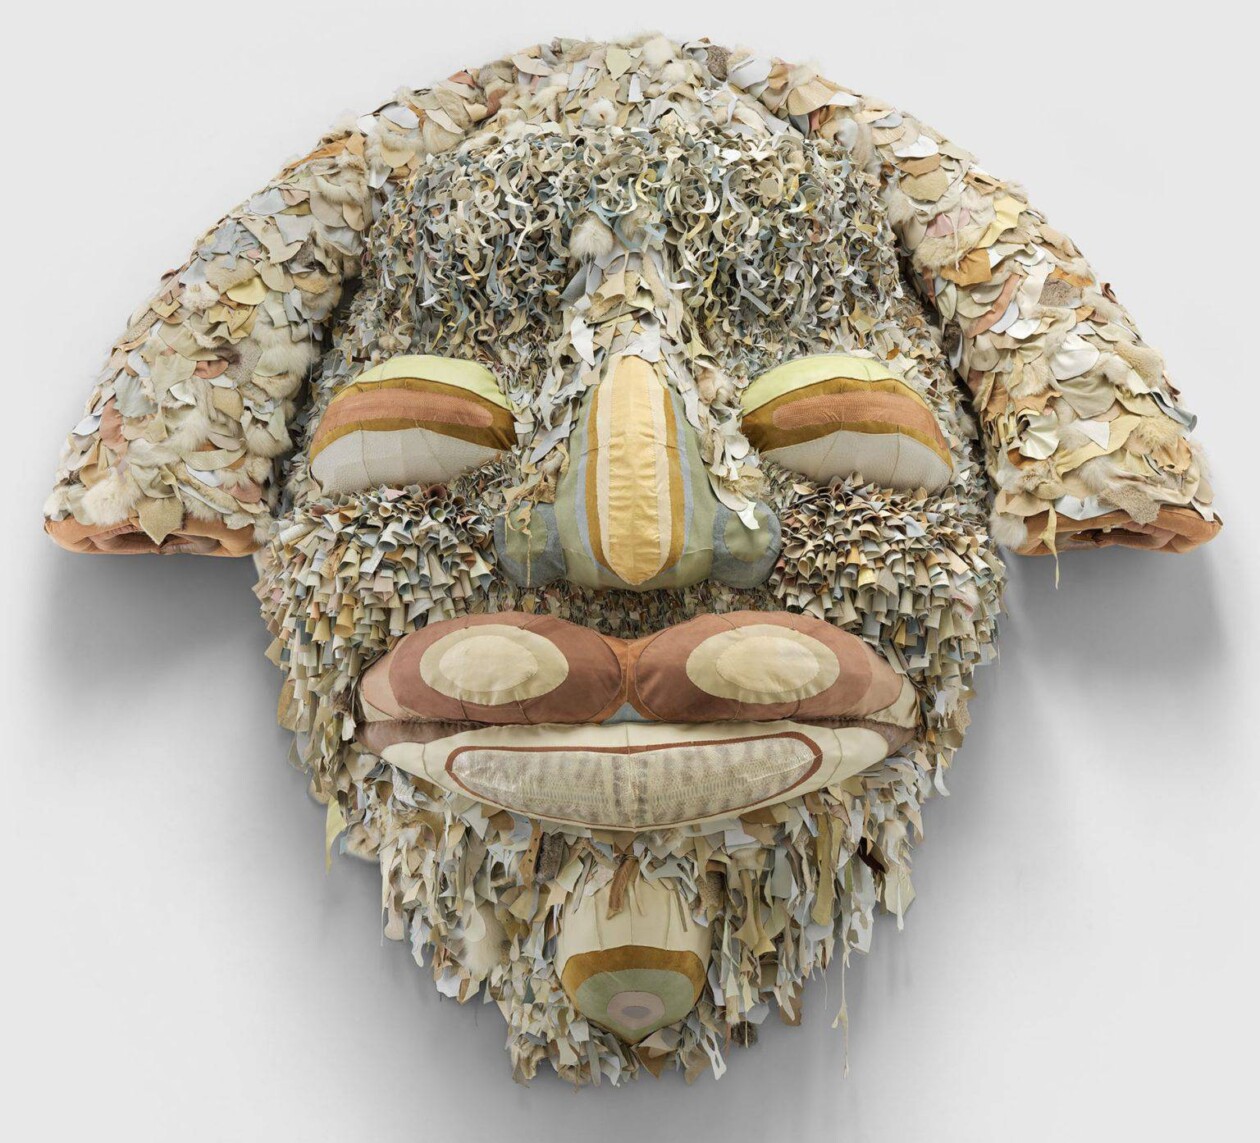 Enigmatic And Meaningful Textile Sculptures By Tau Lewis (13)